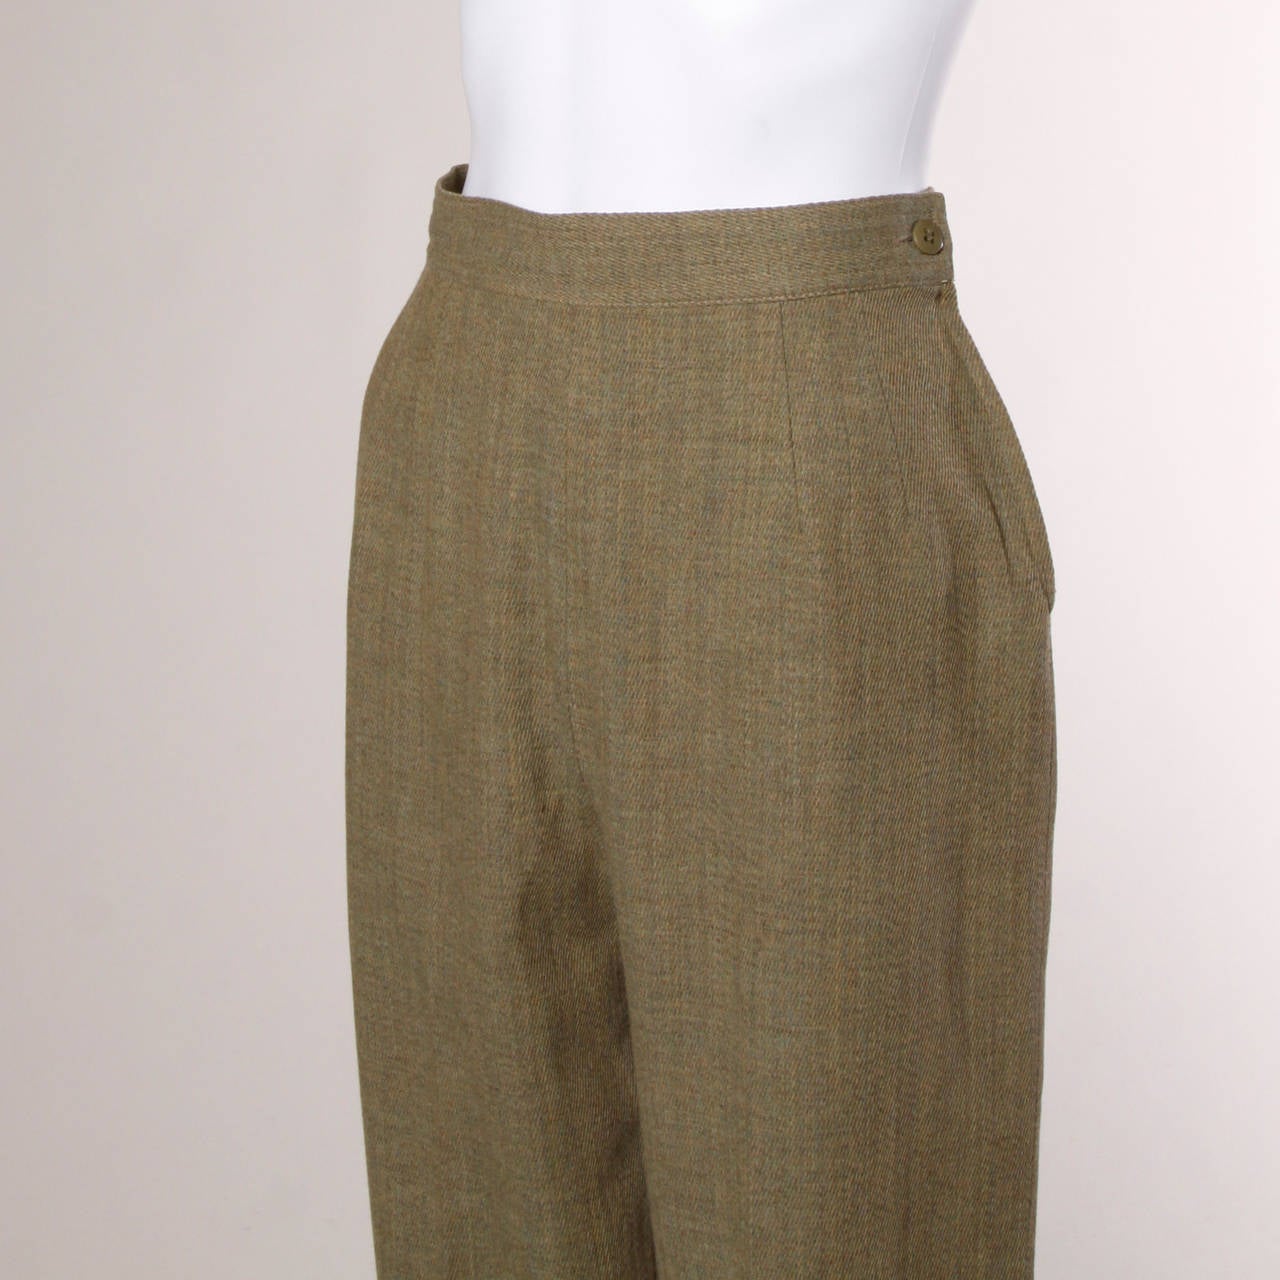 Chic high waisted wool trousers by Valentino in khaki.

Details:

Fully Lined
Side Zip and Button Closure
Marked Size: 8/40
Color: Green Khaki/ Light Mustard Yellow/ Multicolored
Fabric: Wool/ Nylon Lining
Label: Valentino Miss